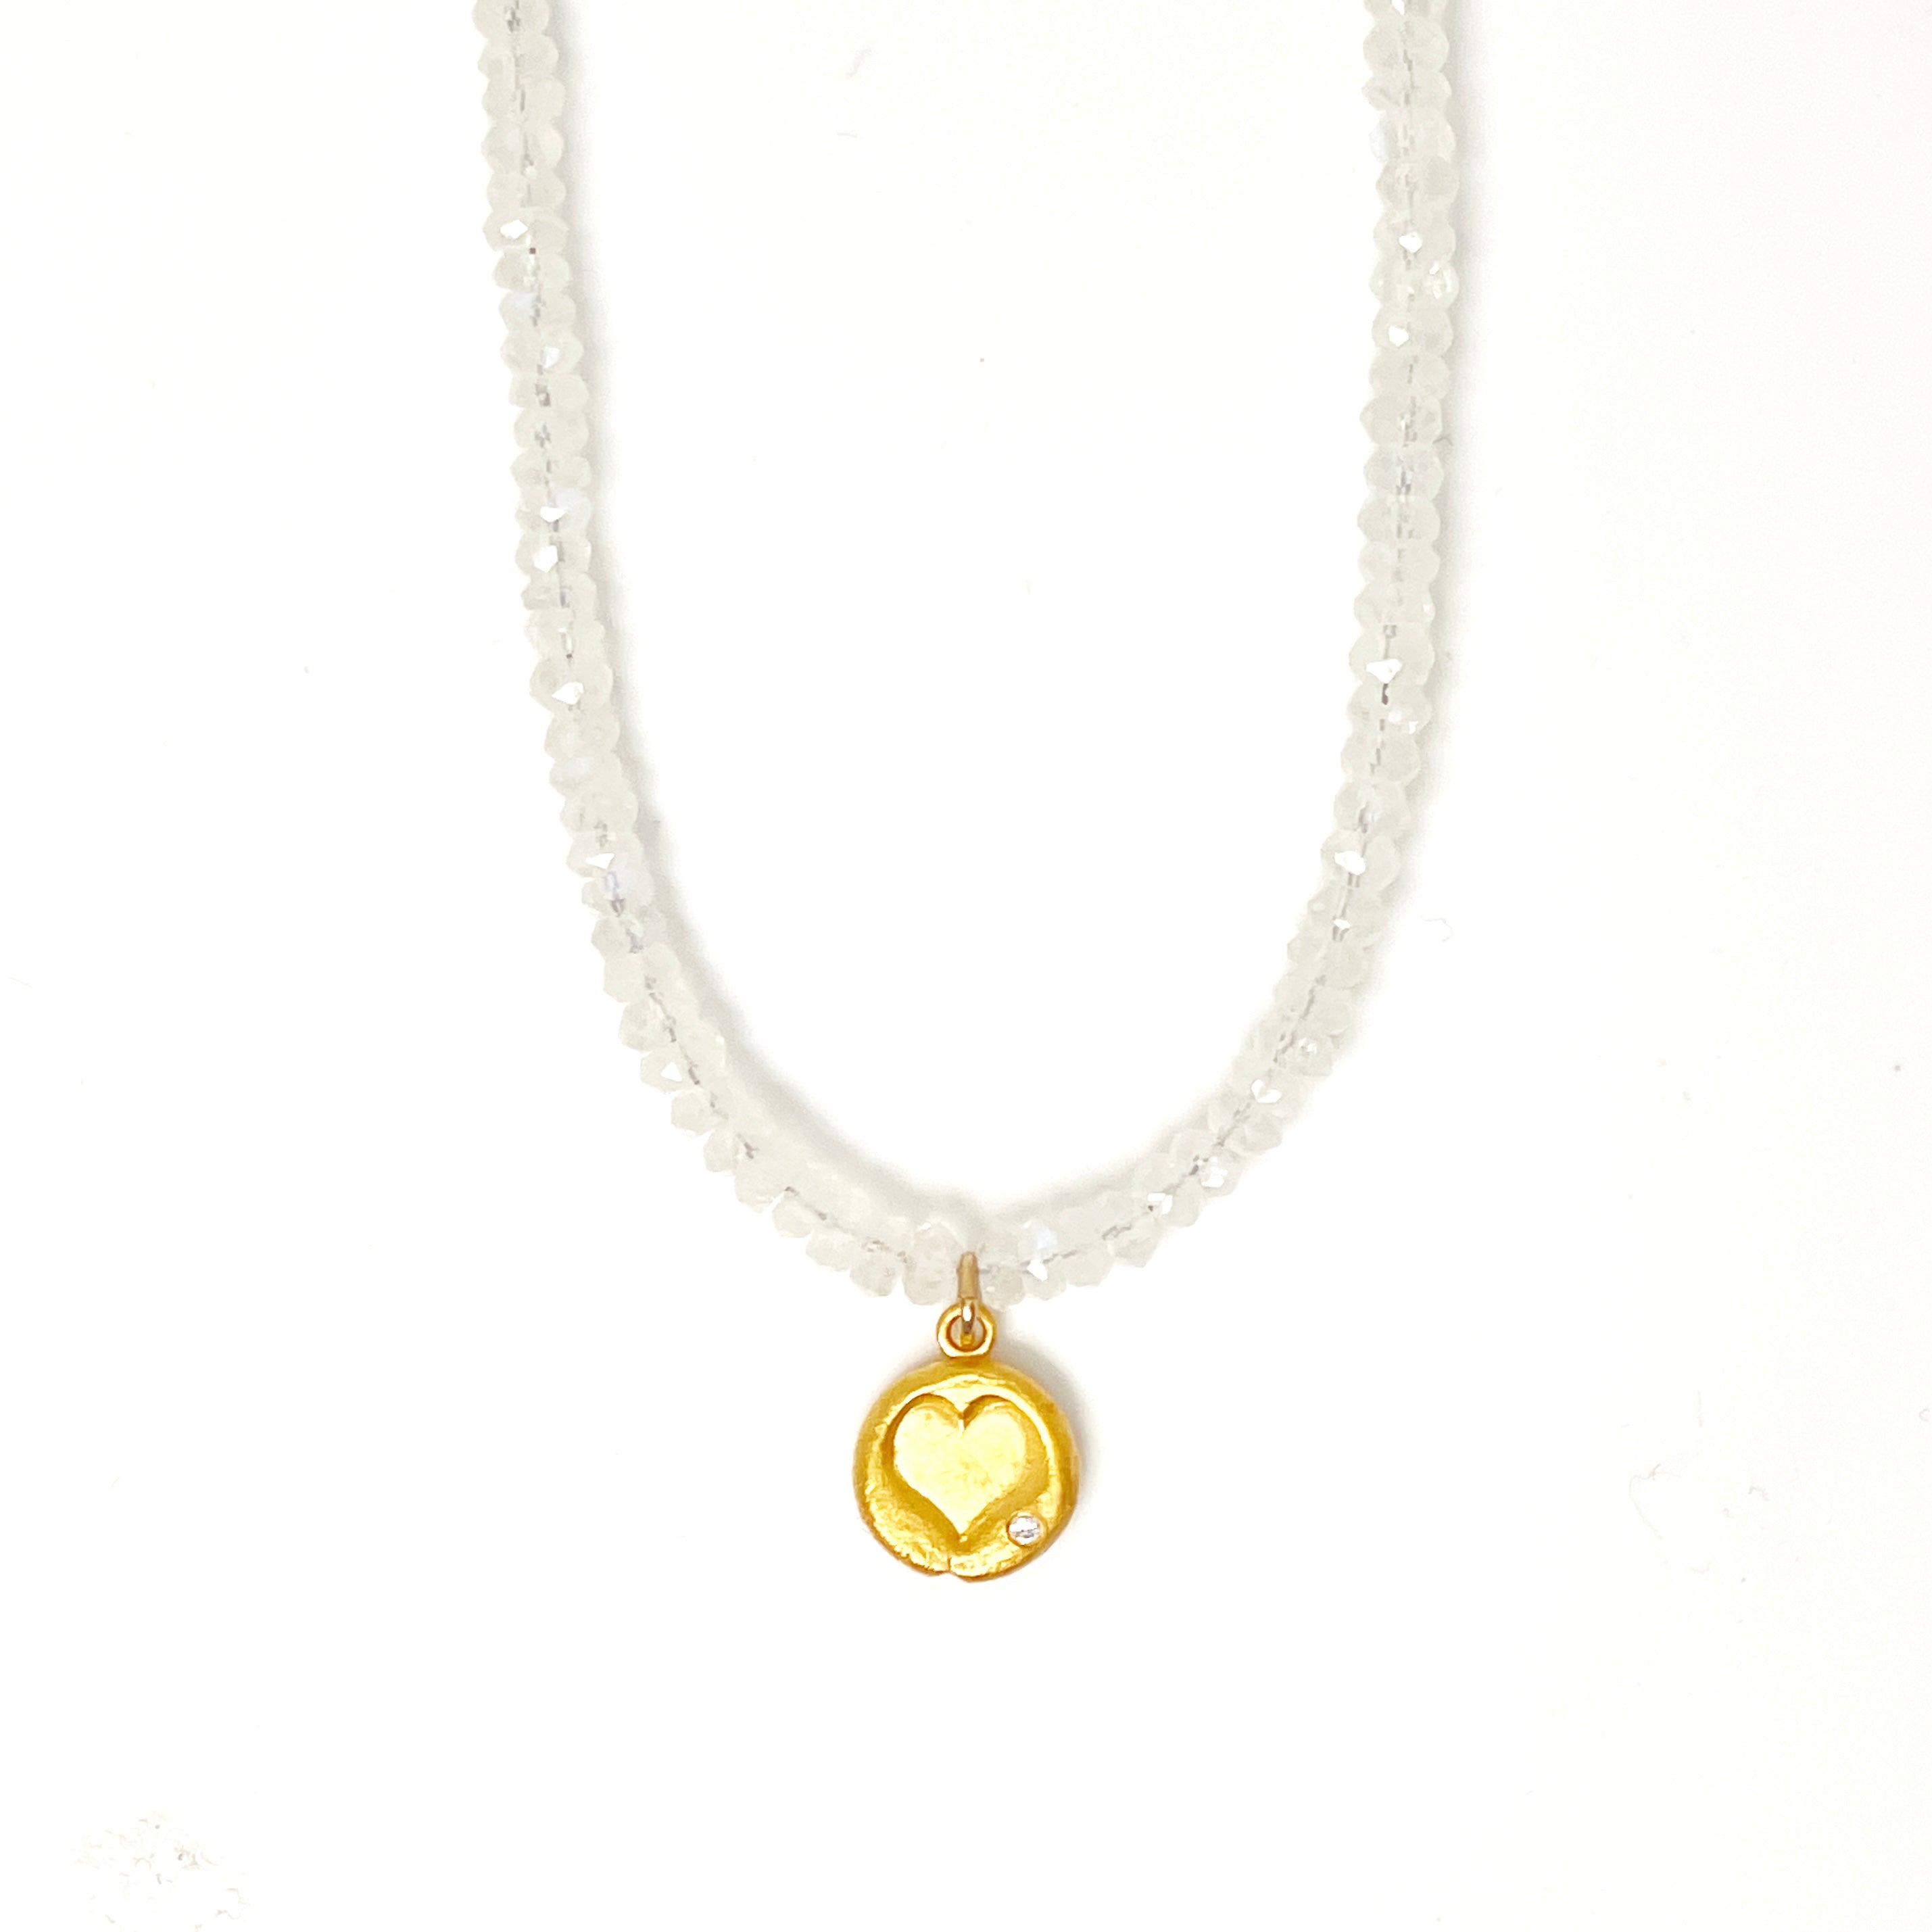 Moonstone Beaded Necklace with Gold Charm